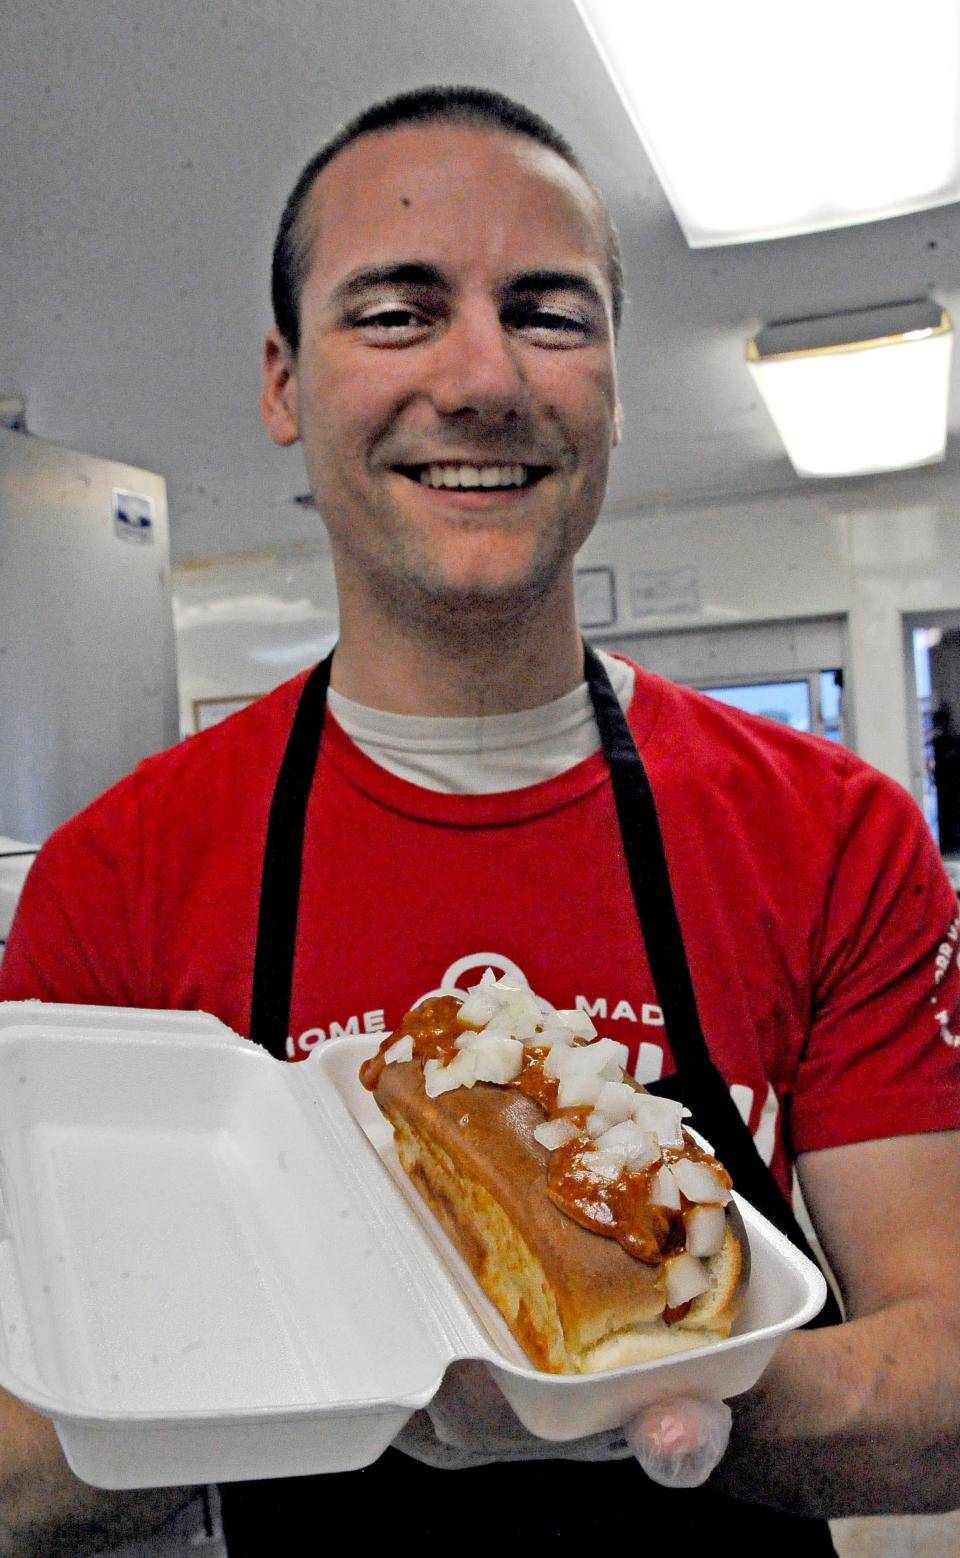 Manager Tanner Bruder says the Coney Dog made famous at Guerne Heights will remain on the menu at Orr Valley Creamery, which purchased the Wooster drive-in and is now open for business.